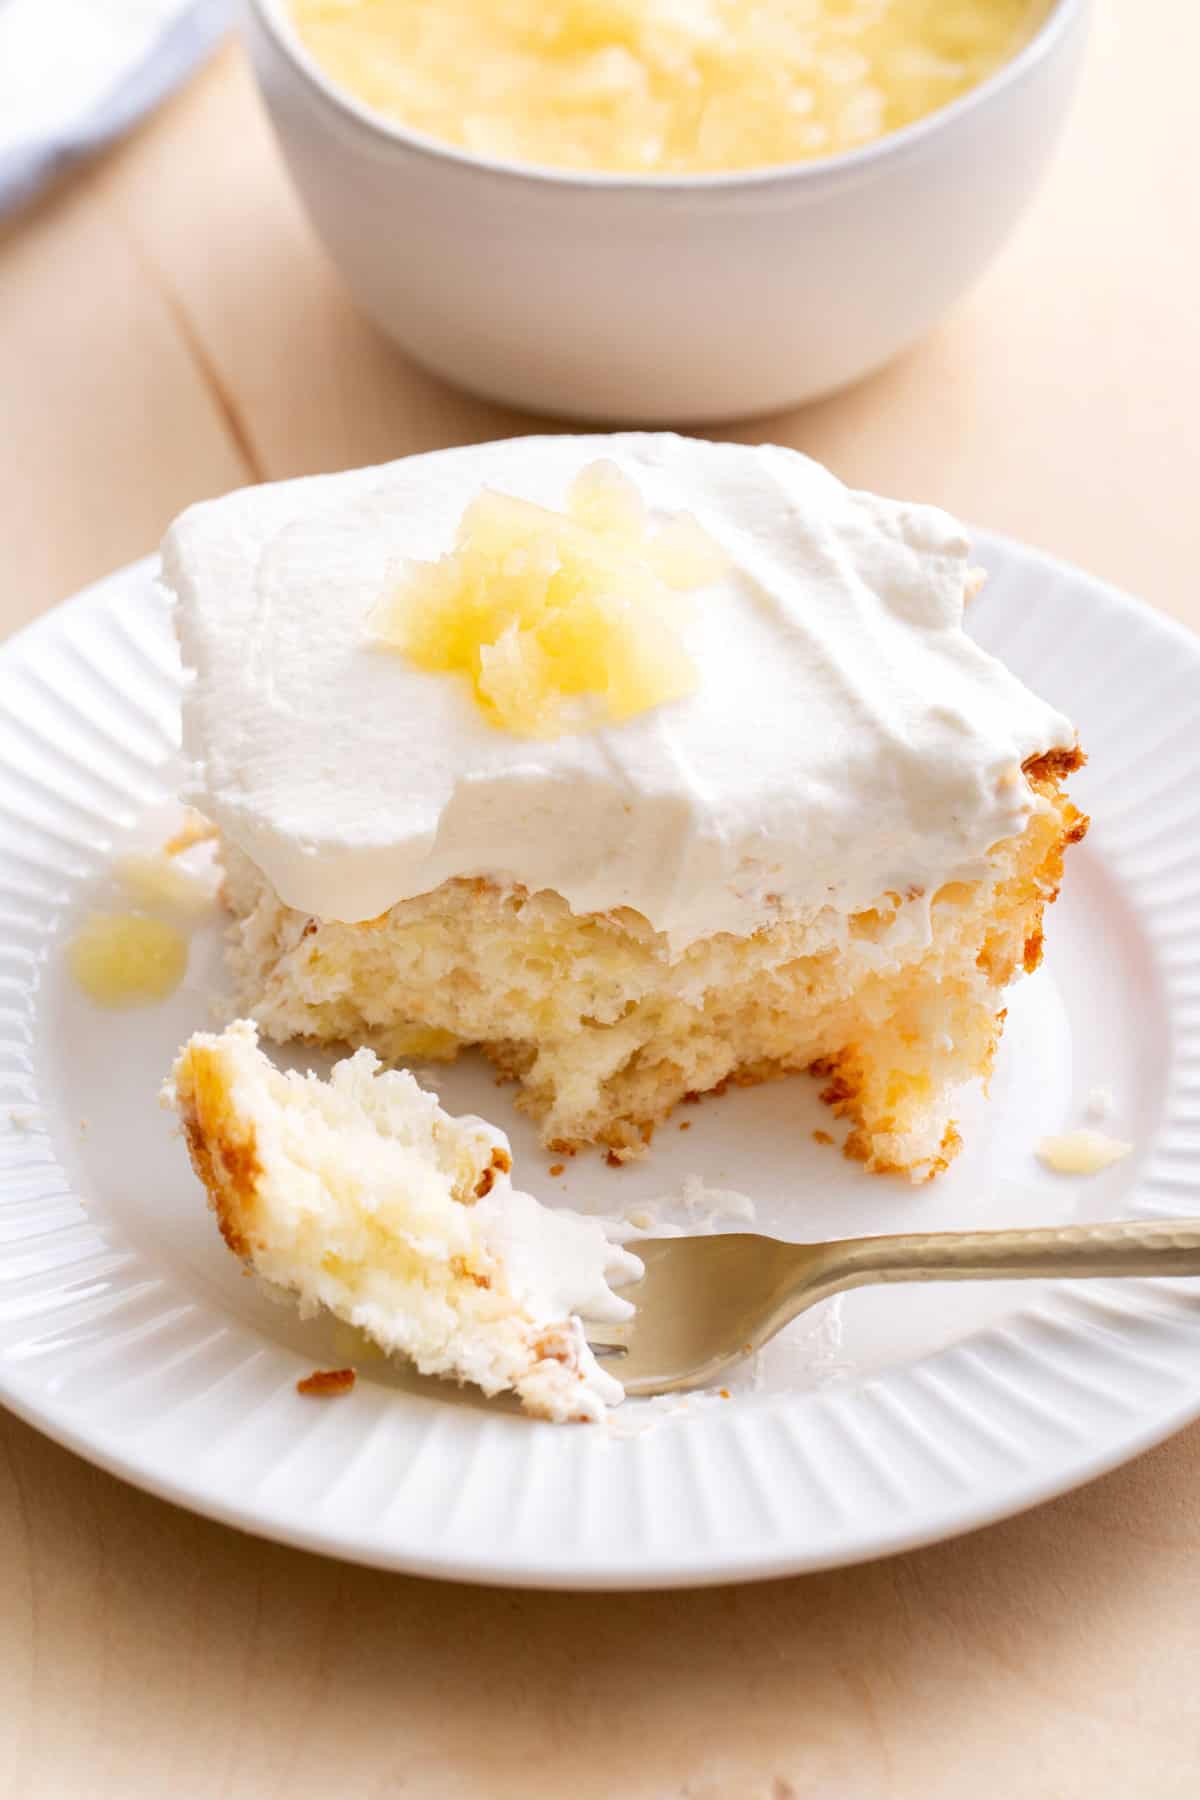 fork digging into a square serving of pineapple angel food cake served on a white round plate